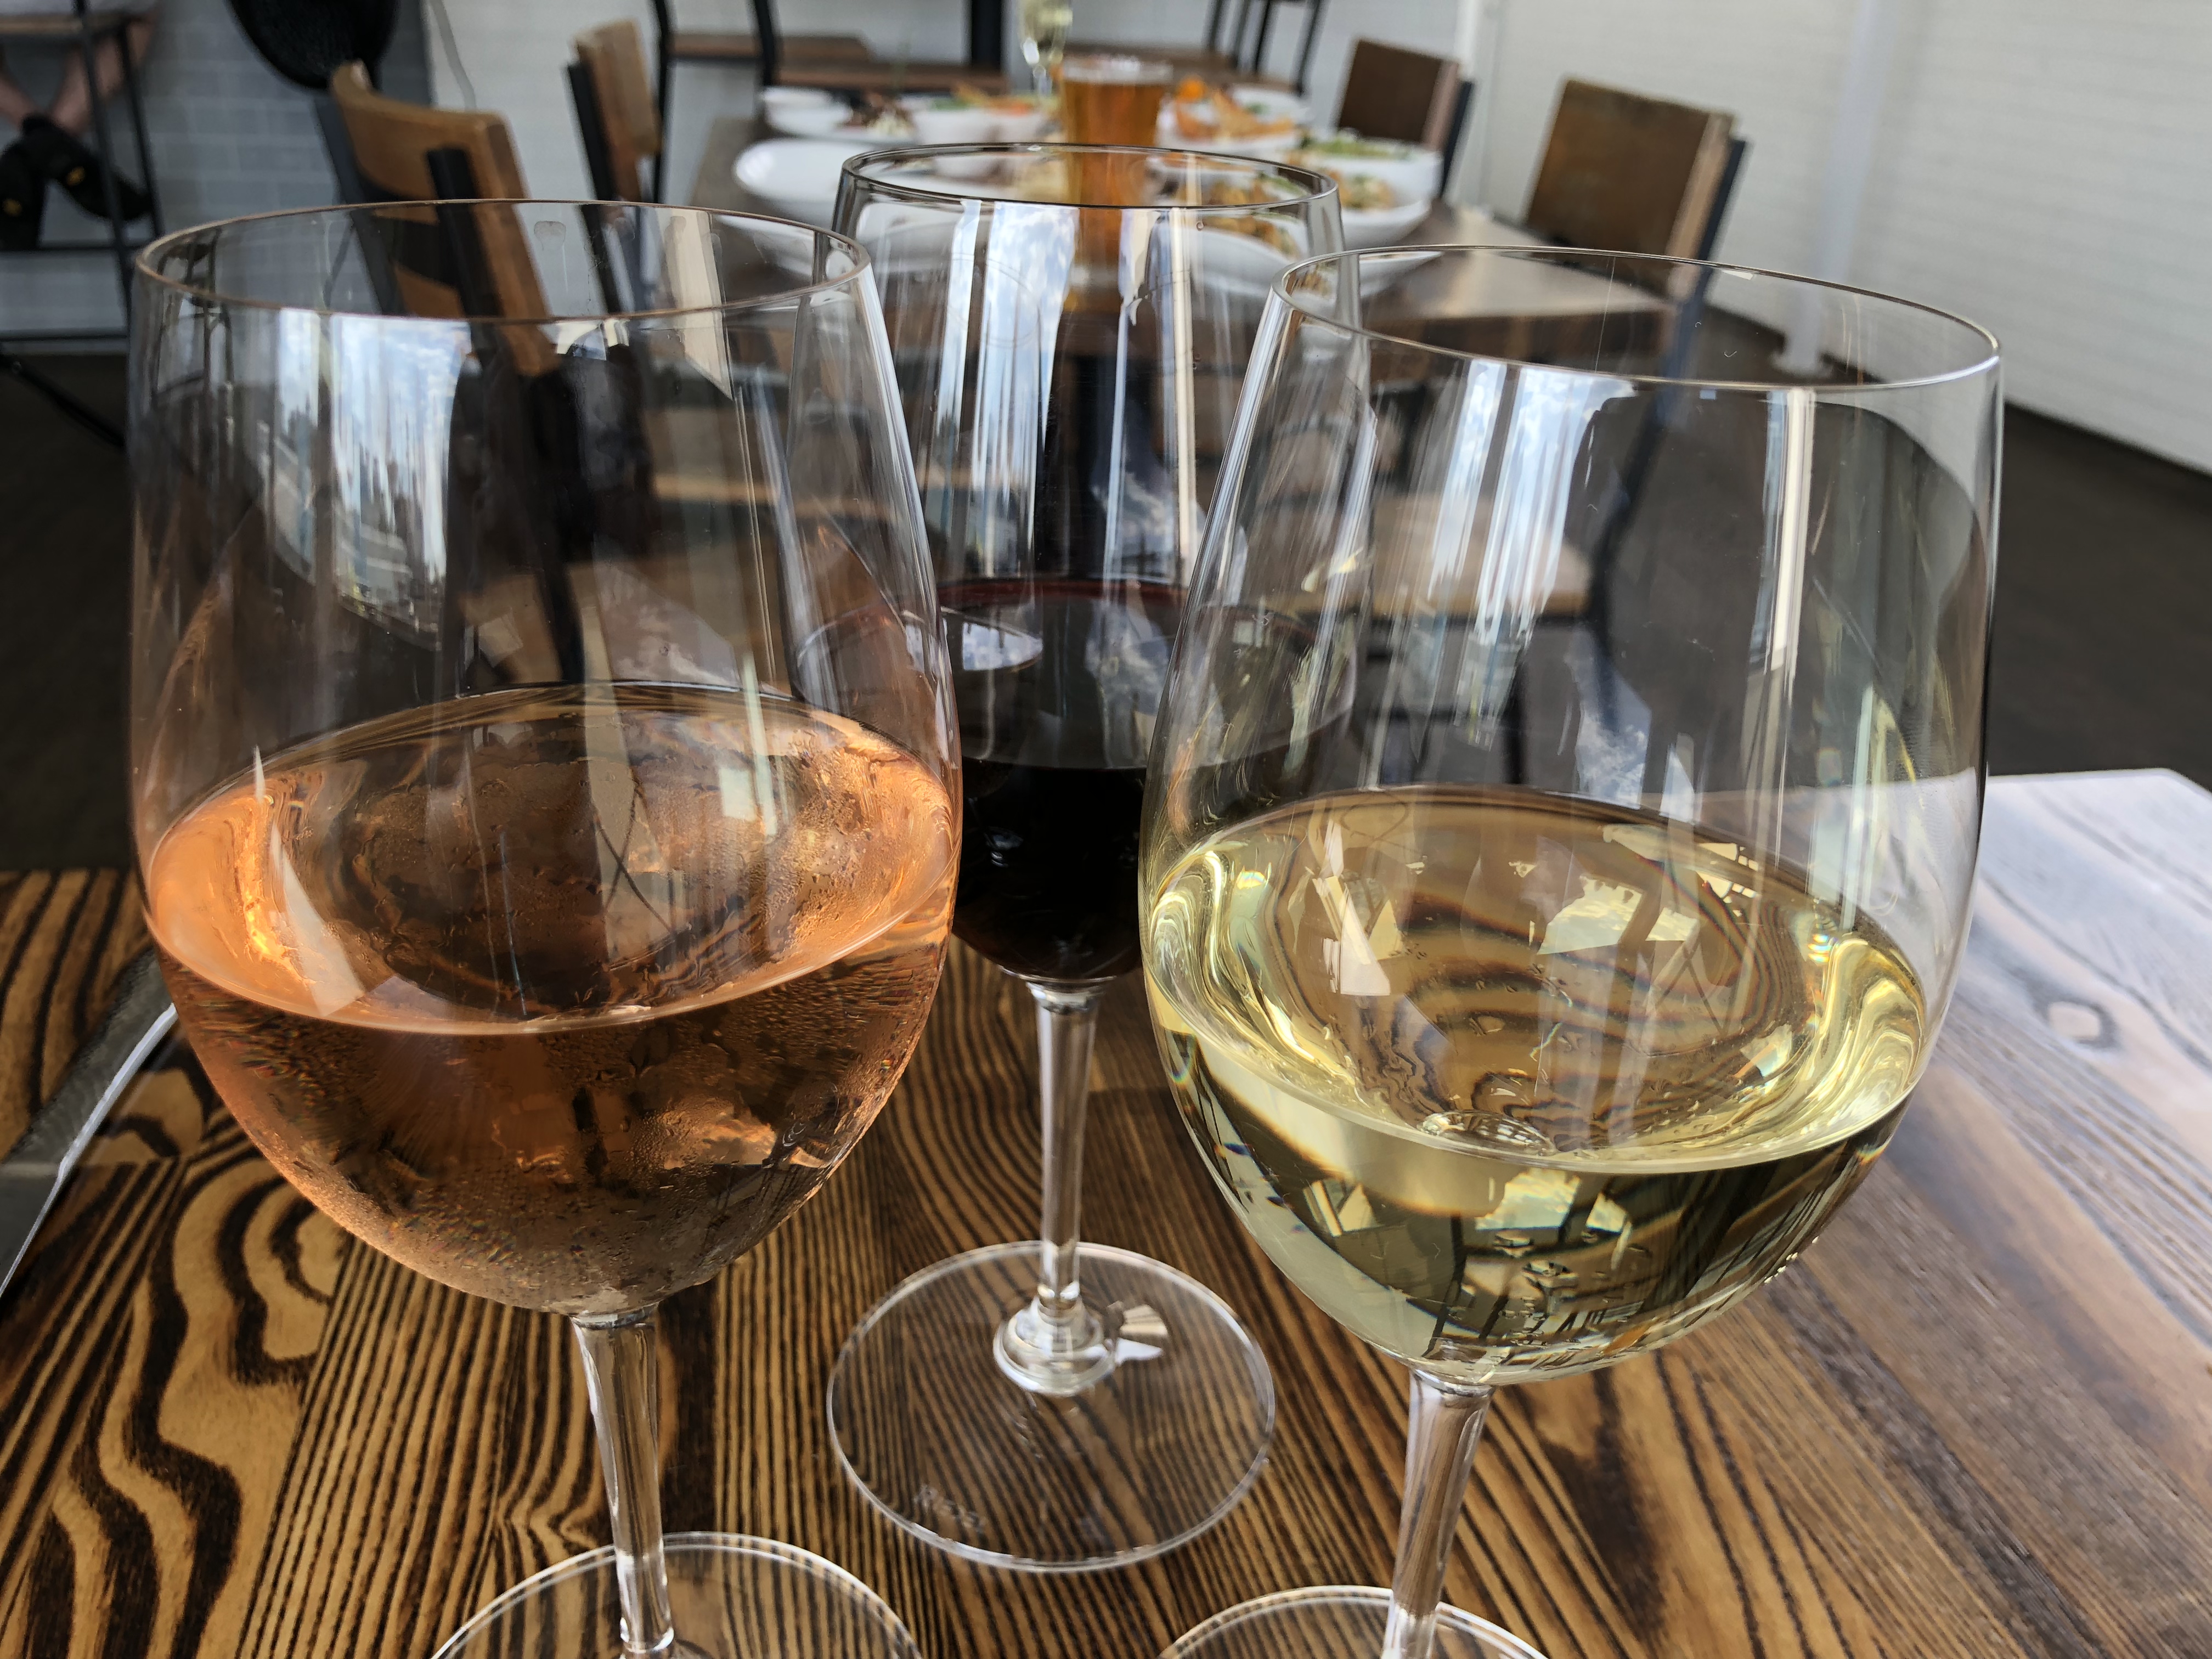 Pour, Drink & Repeat during a Free Wine Tasting with Savi Provisions